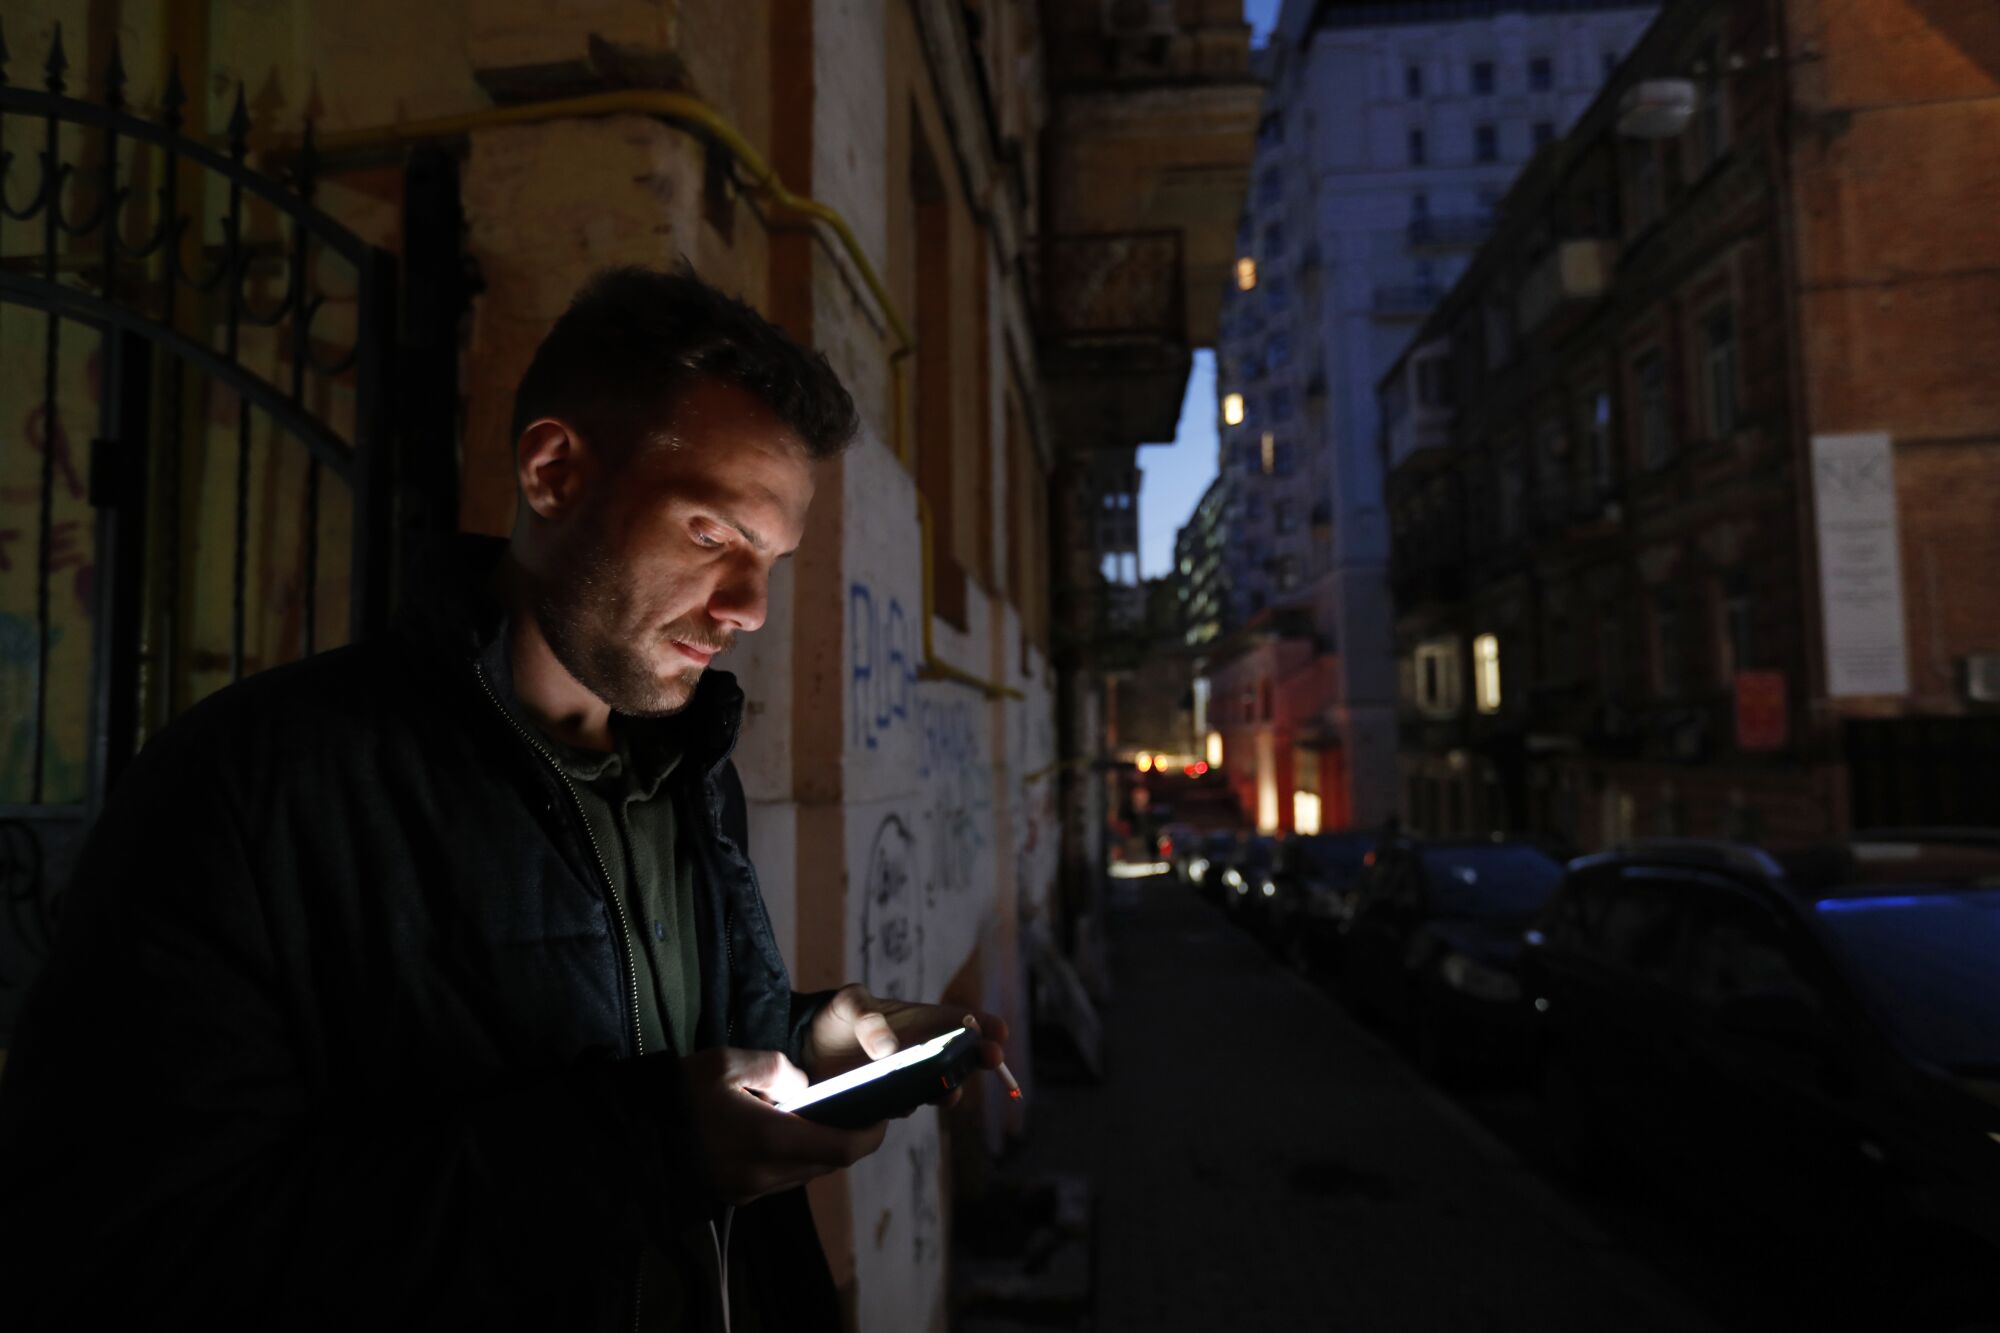 A man's phone lights up his face as he stands on a darkening city street